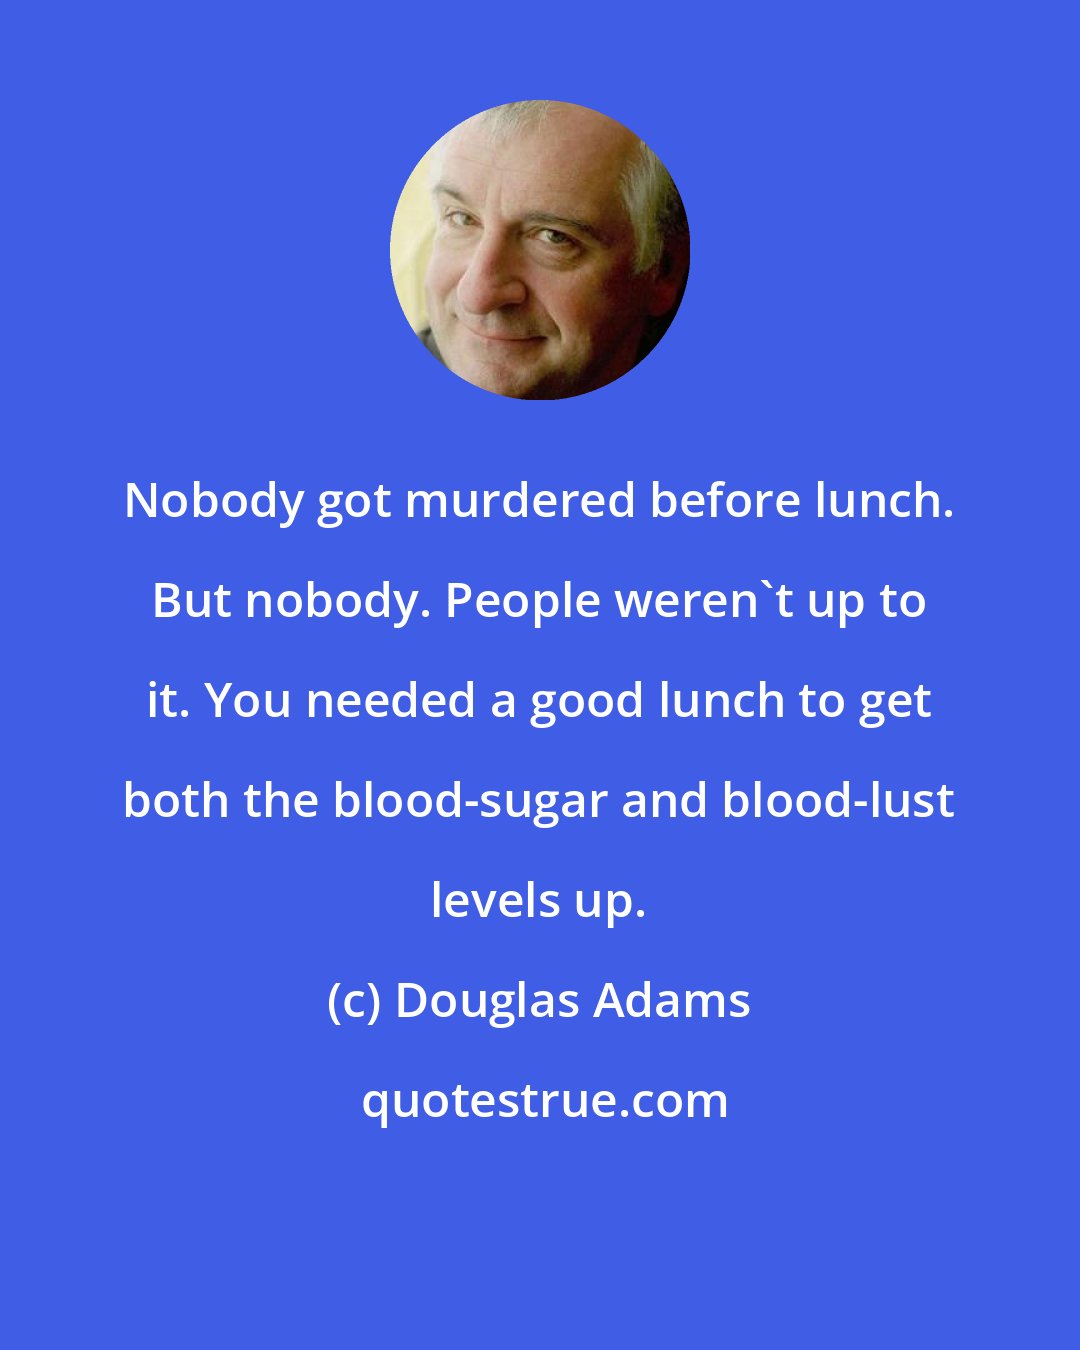 Douglas Adams: Nobody got murdered before lunch. But nobody. People weren't up to it. You needed a good lunch to get both the blood-sugar and blood-lust levels up.